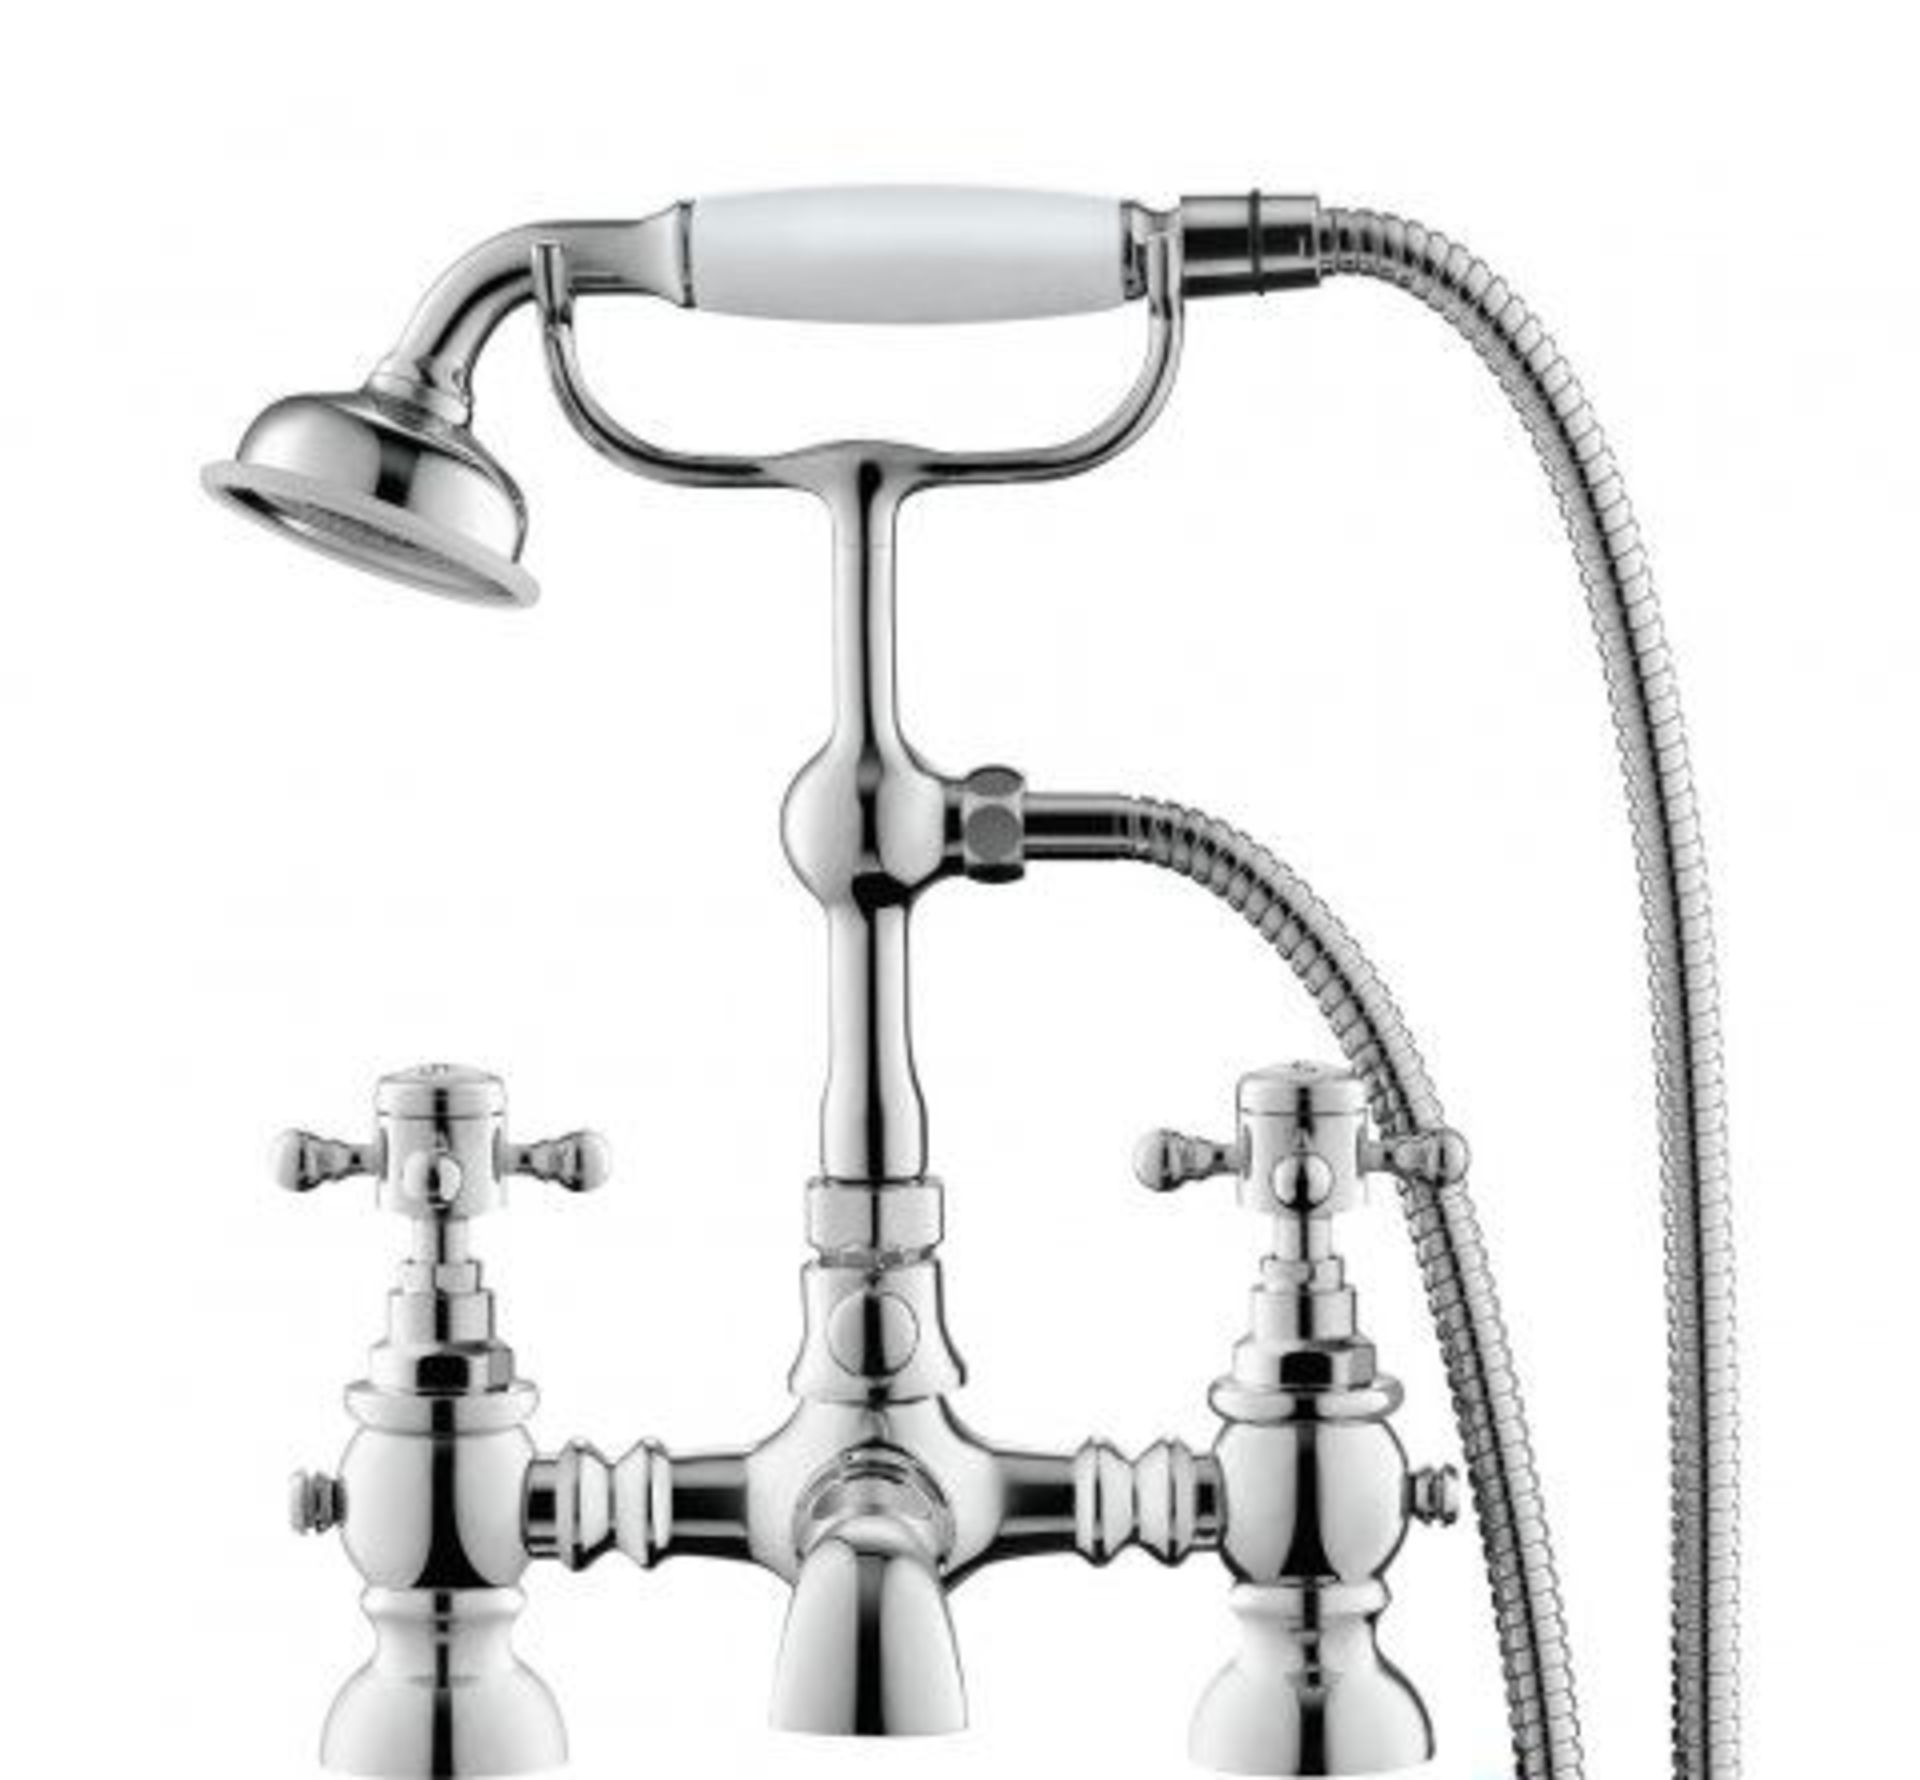 New & Boxed Victoria II Bath Shower Mixer - Traditional Tap With Hand Held. Tb35.Chrome Plated - Image 2 of 2